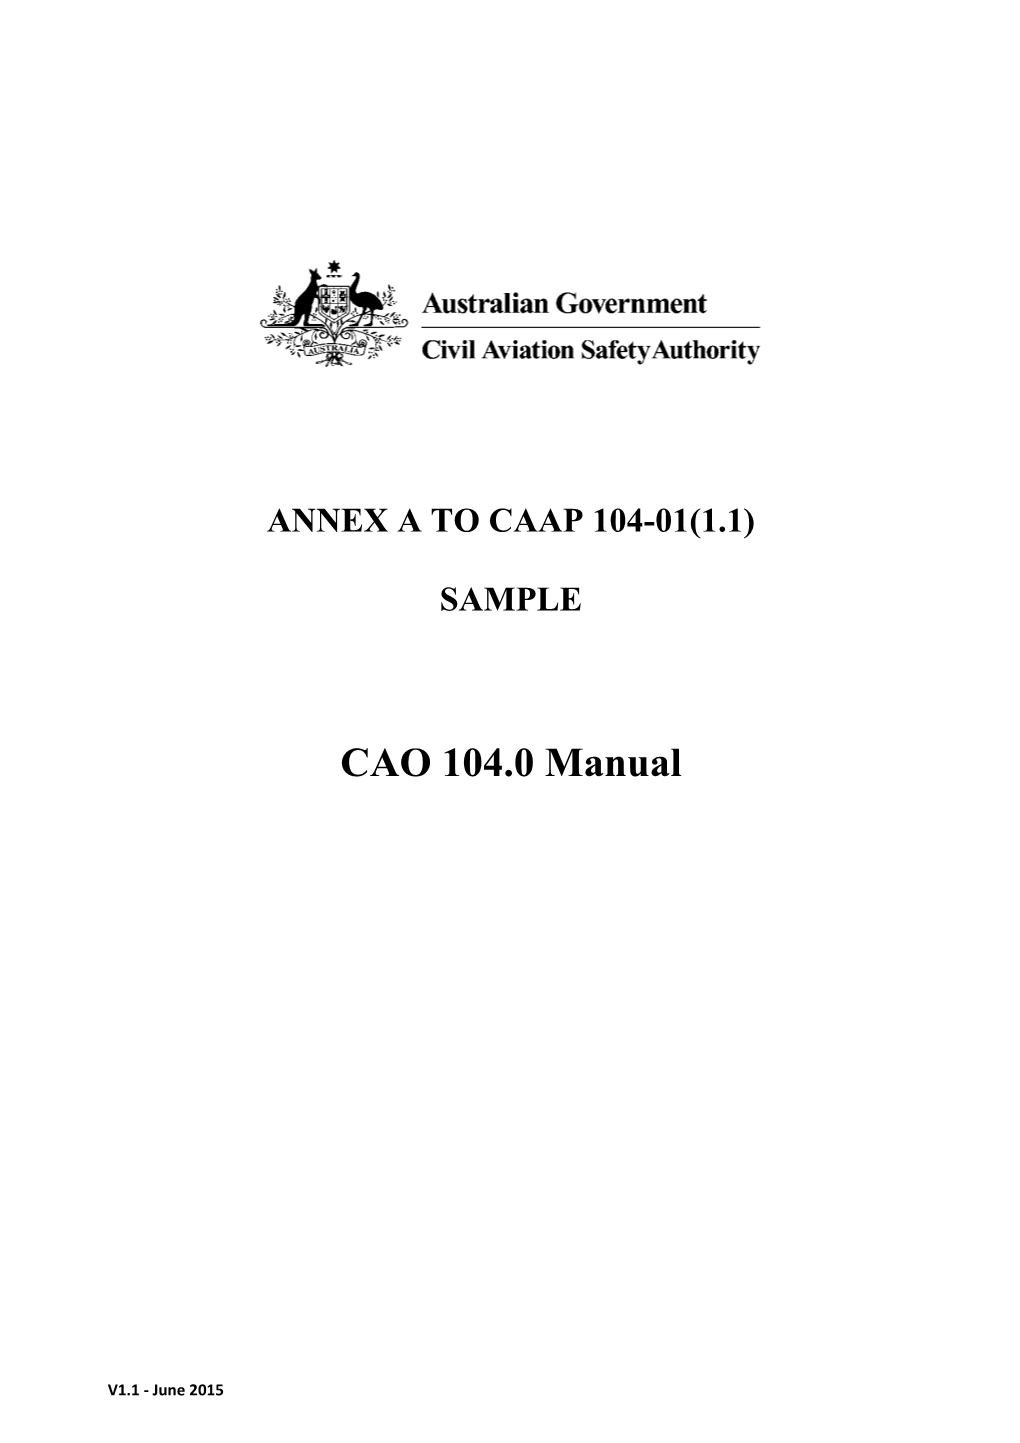 ANNEX a to CAAP 104-01(1.1) - Sample CAO 104.0 Manual